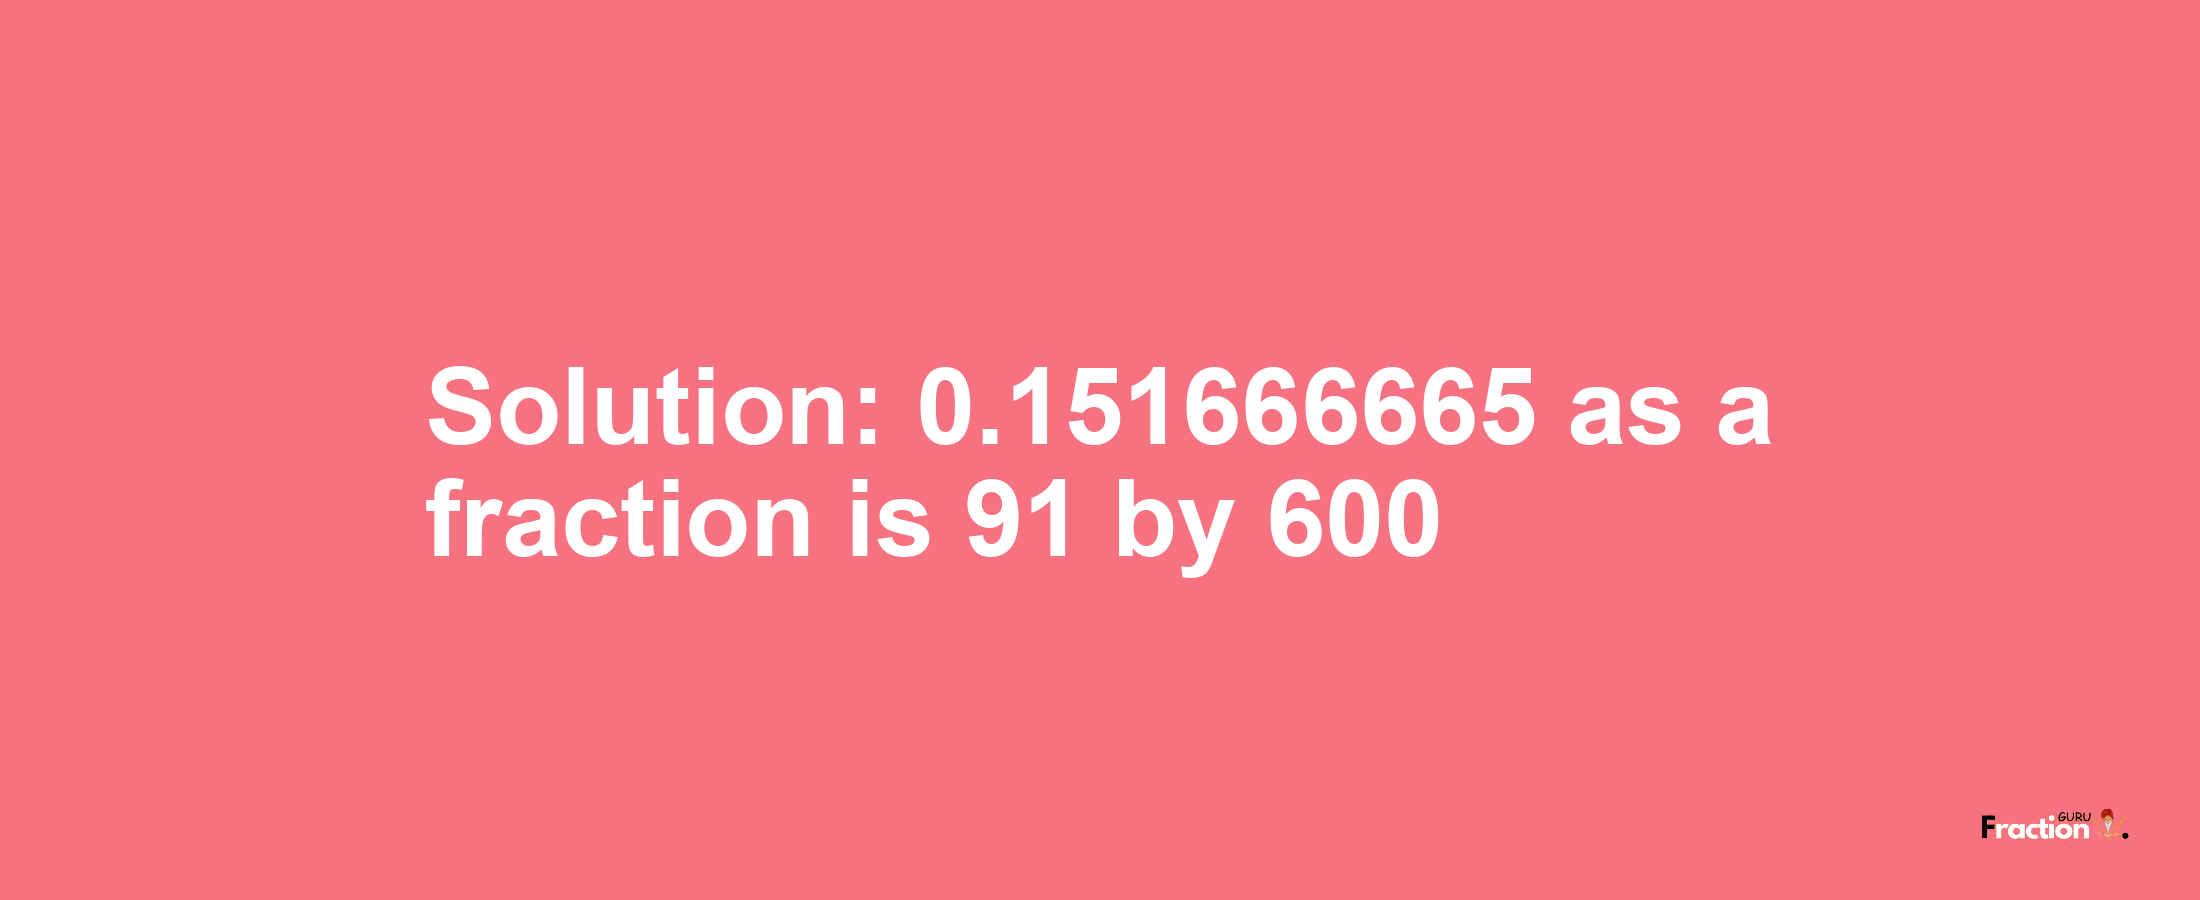 Solution:0.151666665 as a fraction is 91/600